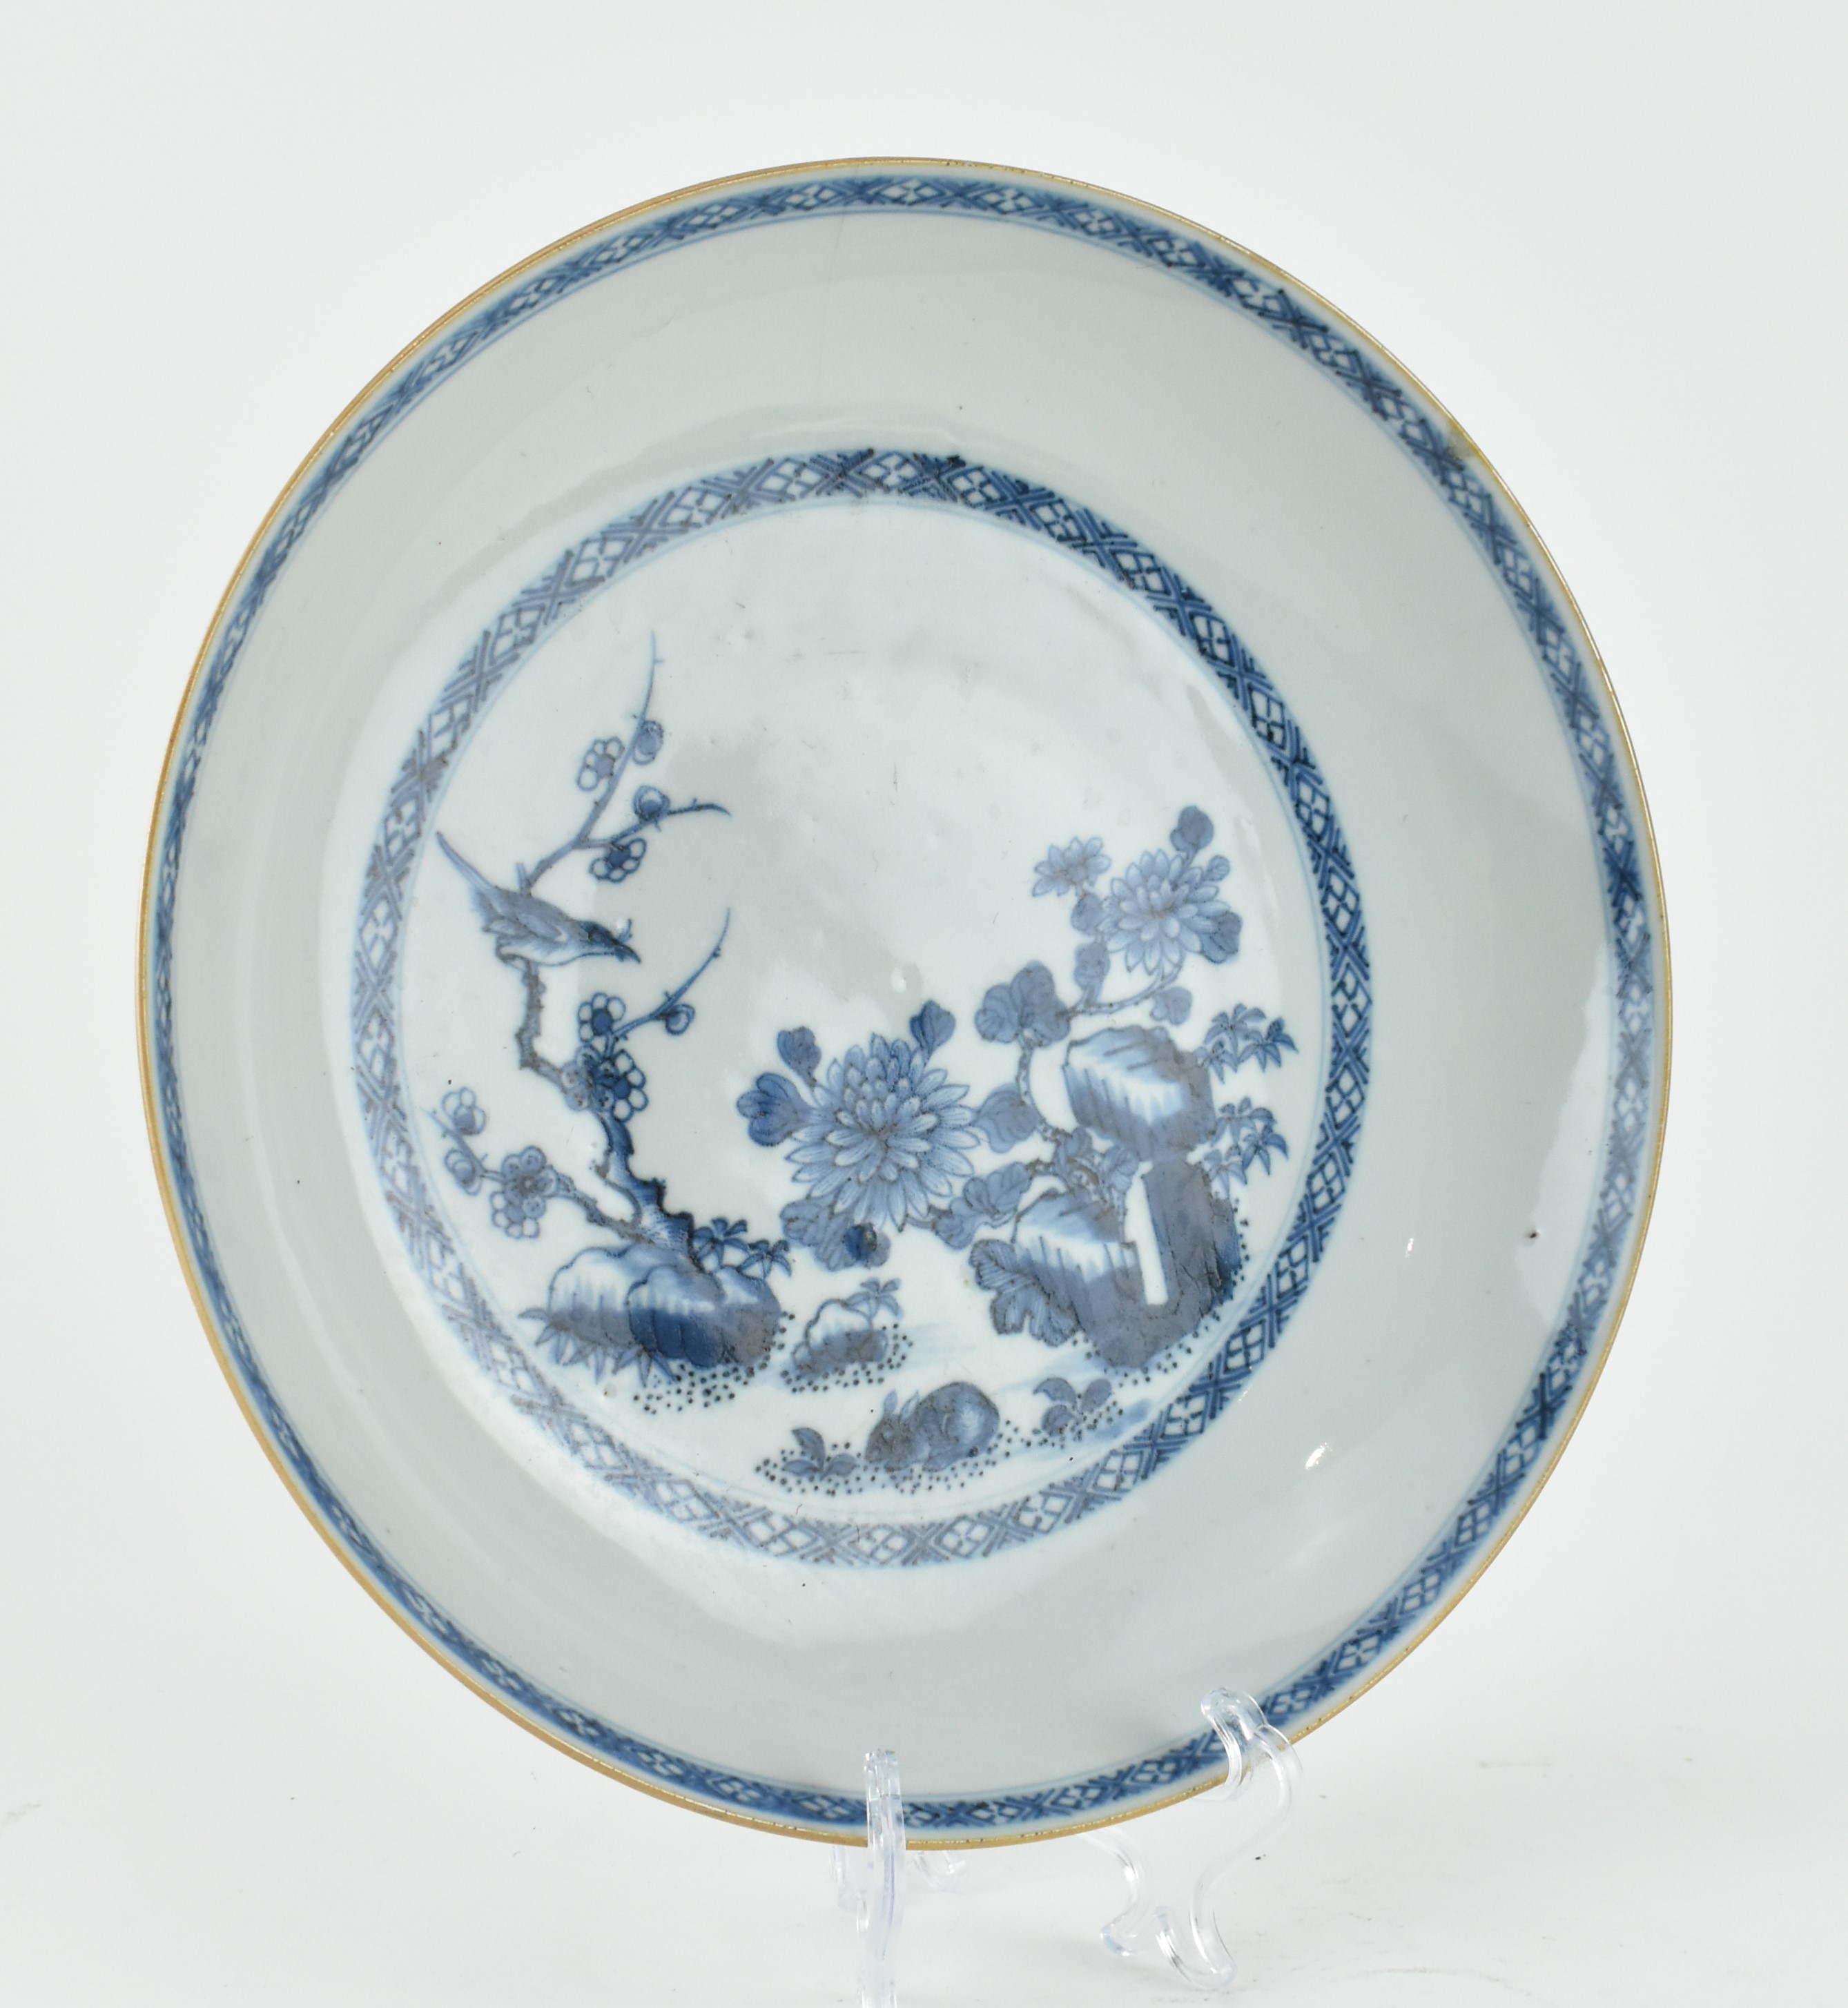 QING 18TH CENTURY BLUE AND WHITE CHARGER 清 康熙青花花鸟盘 - Image 2 of 5